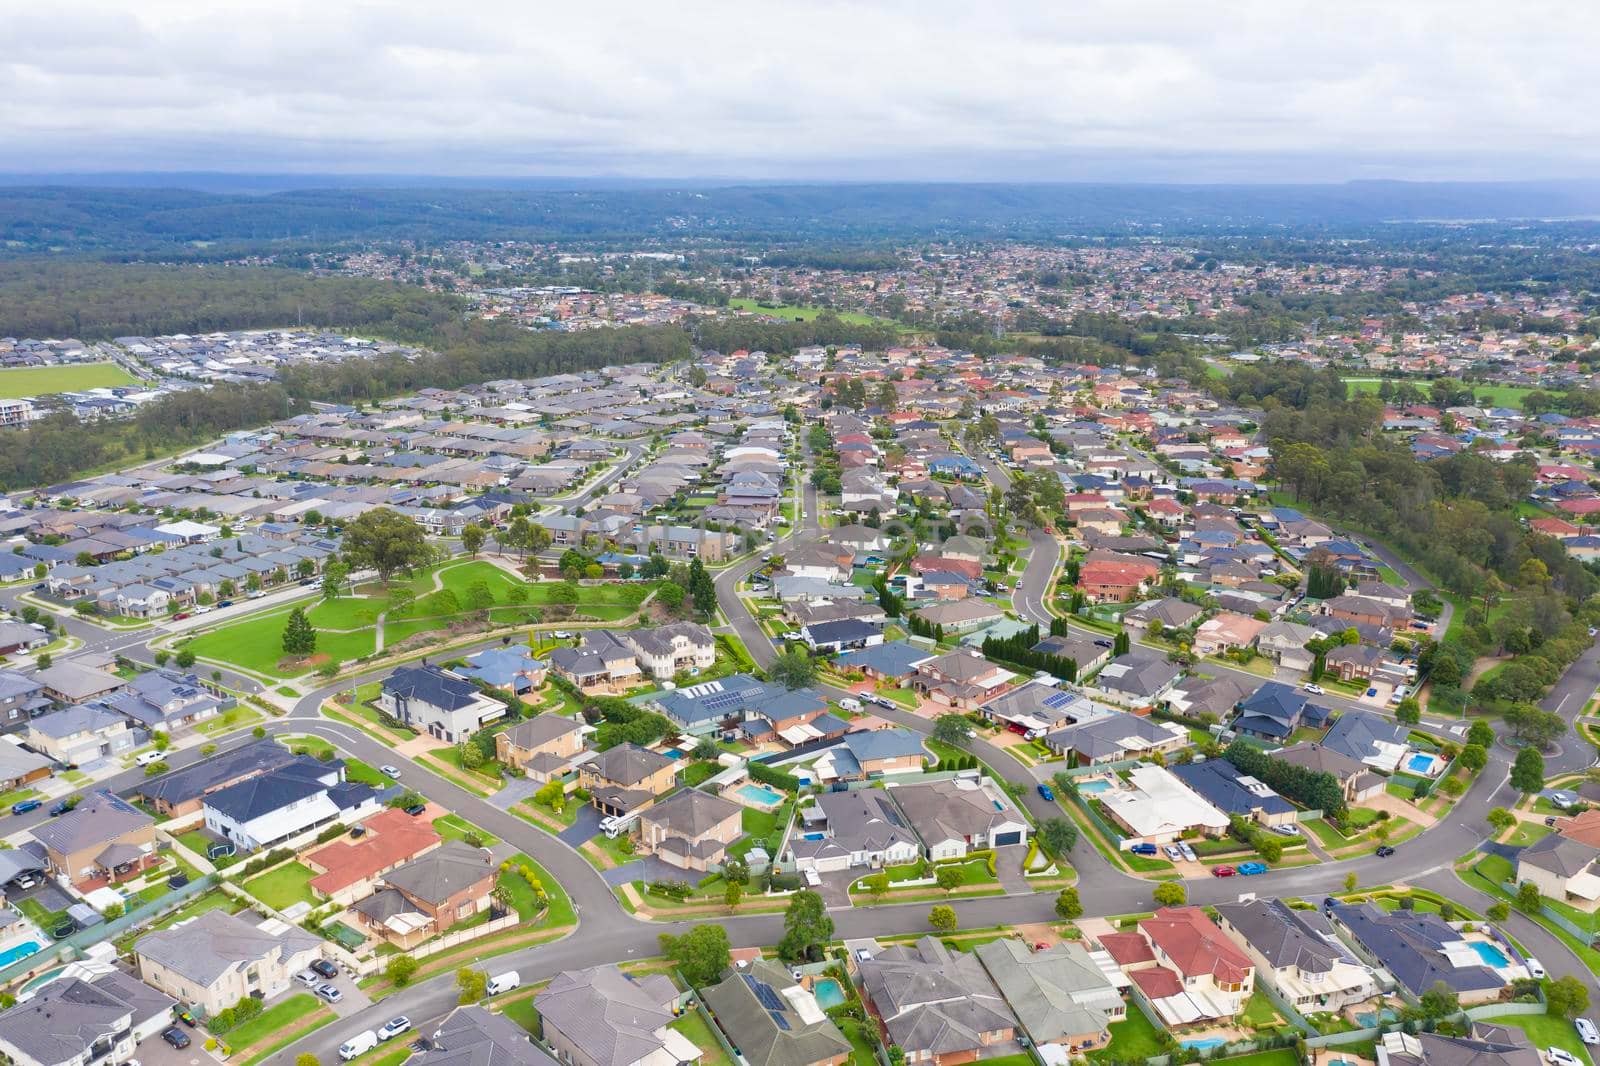 Aerial view of grey roofed houses in the suburb of Glenmore Park in New South Wales in Australia